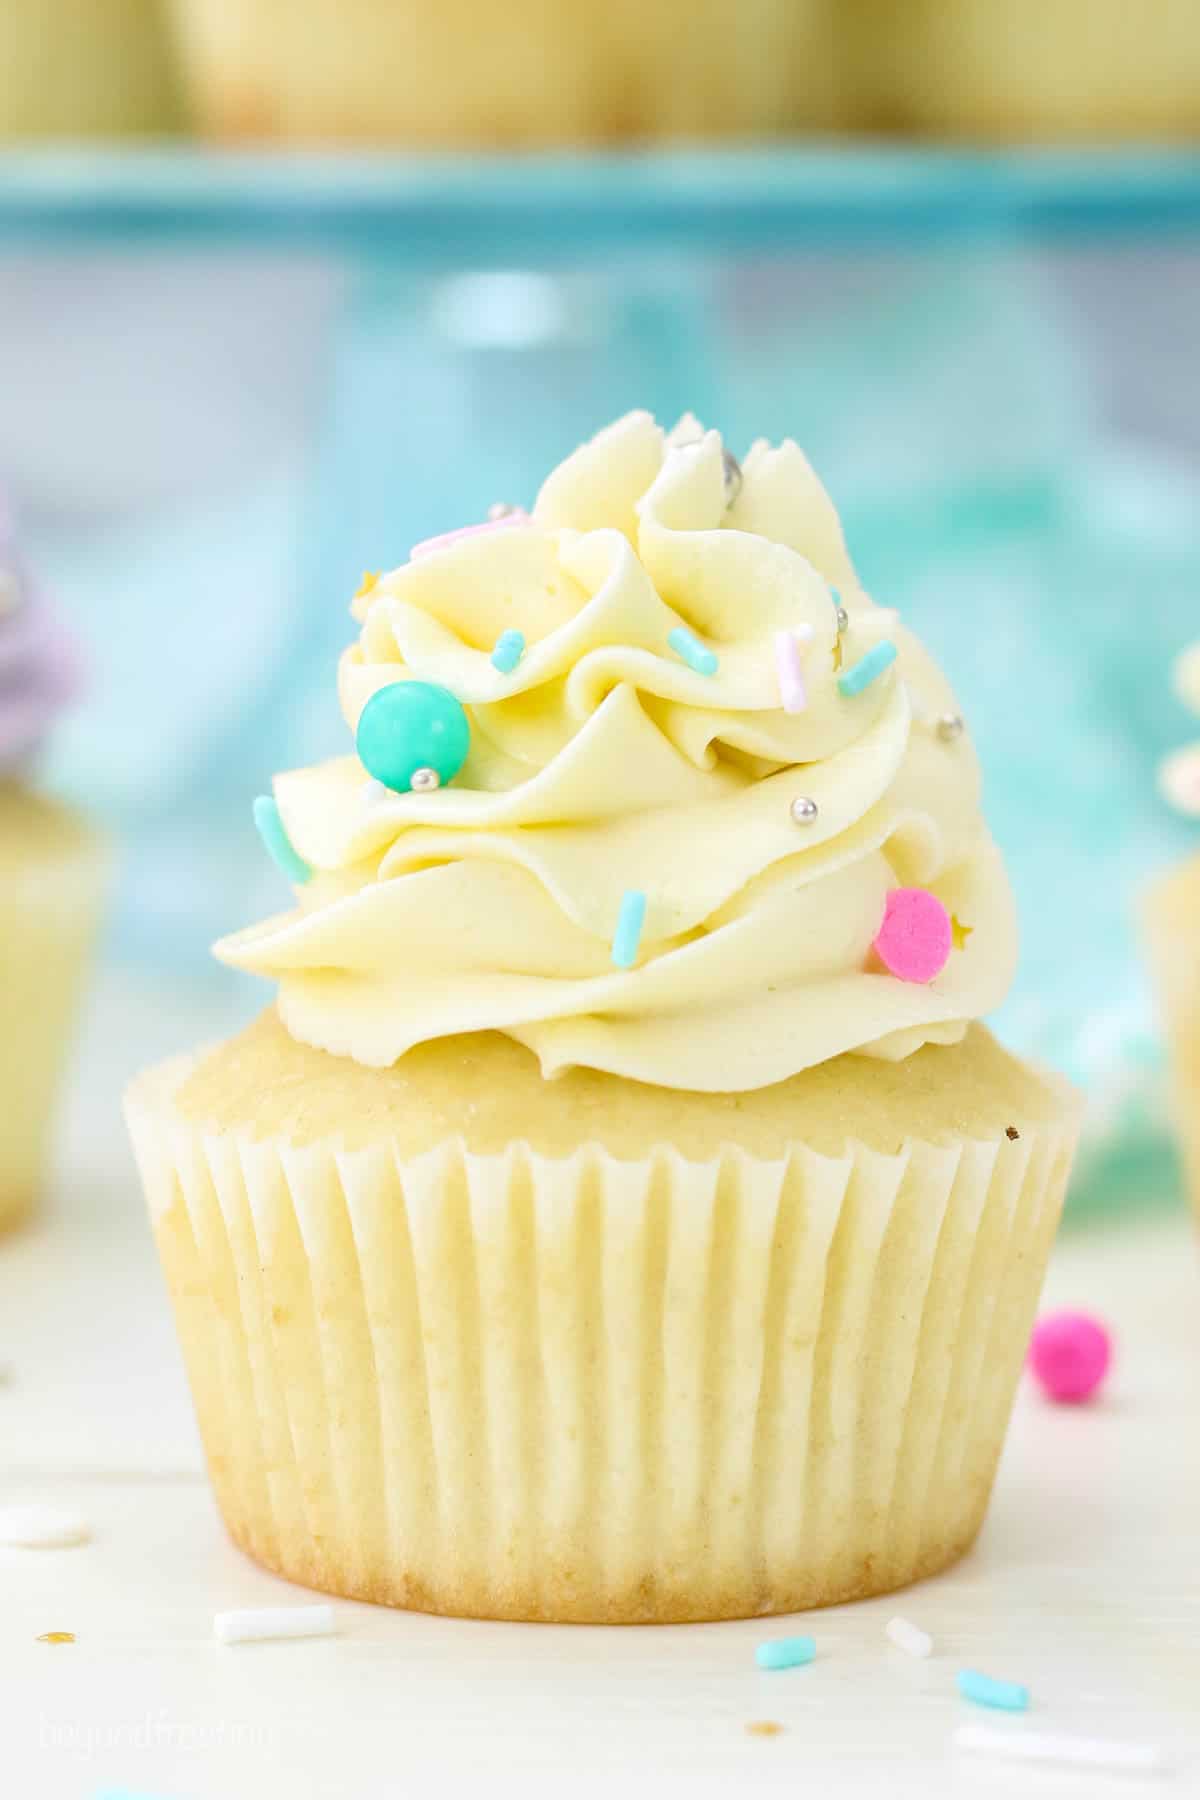 Close up of a vanilla cupcake frosted with a swirl of white Swiss meringue buttercream frosting.